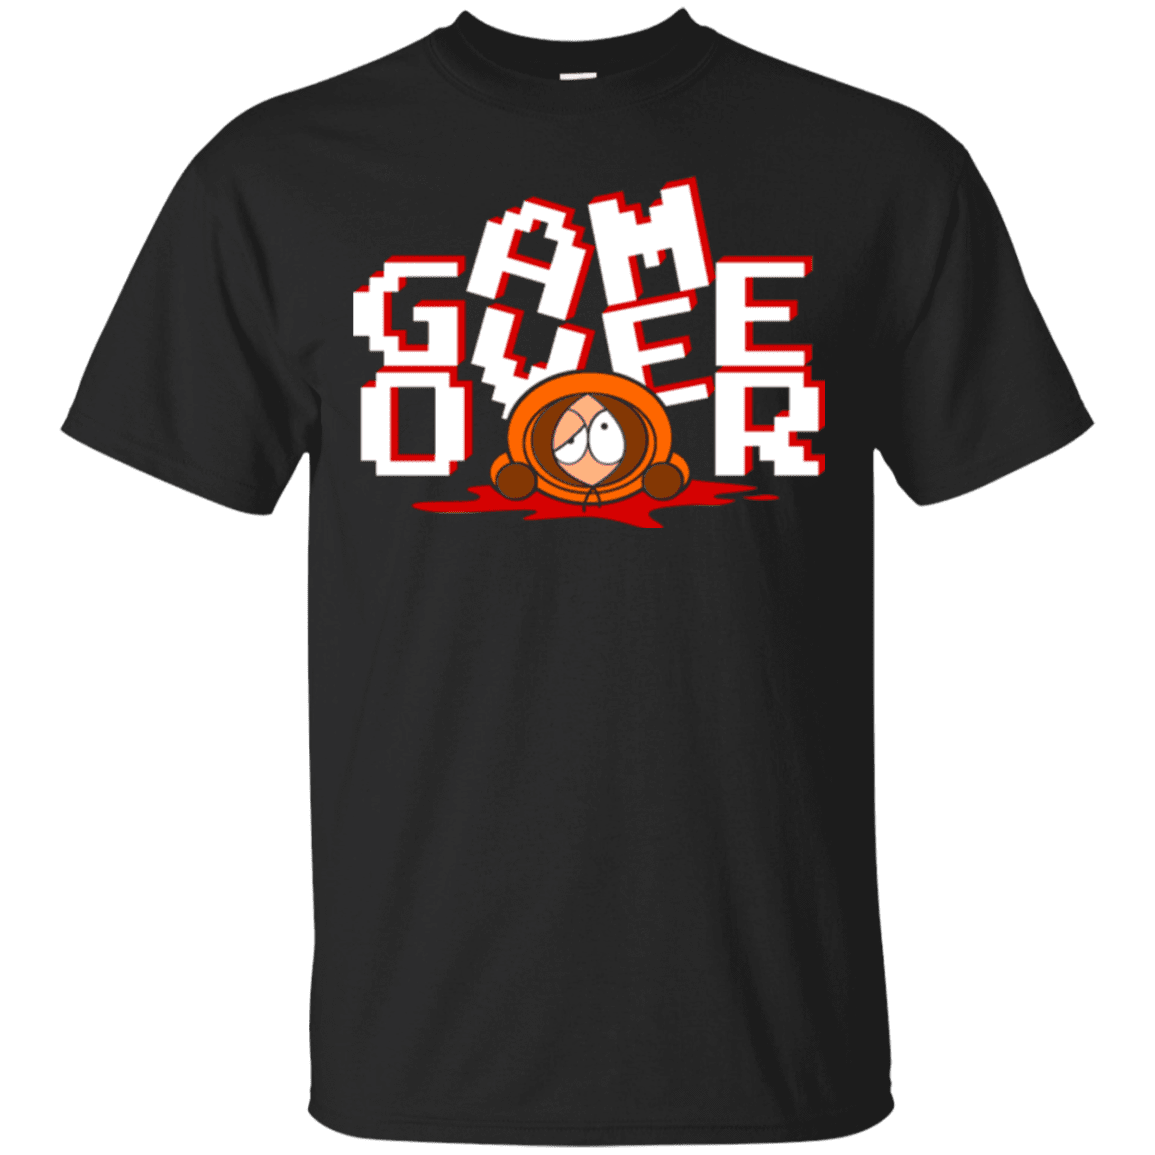 T-Shirts Black / Small Game over T-Shirt